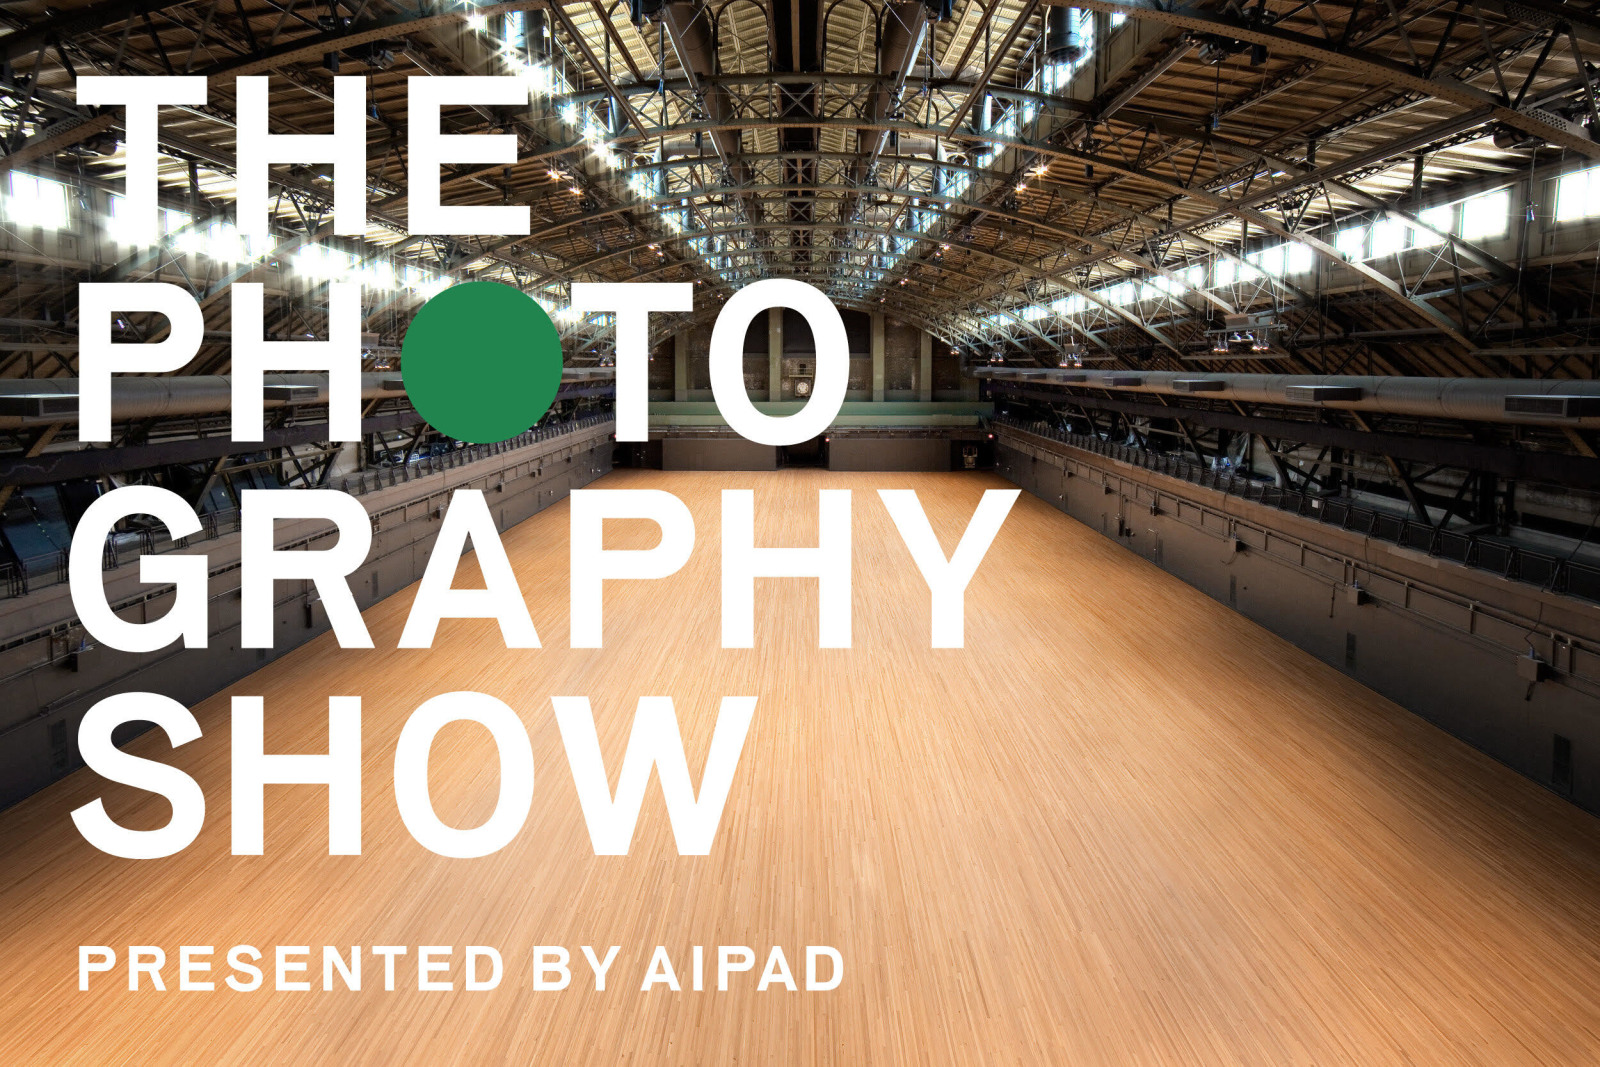 The empty Drill Hall of the Park Avenue Armory with THE PHOTOGRAPHY SHOW logo on the left side. The first O in PHOTO is replaced by a green dot.